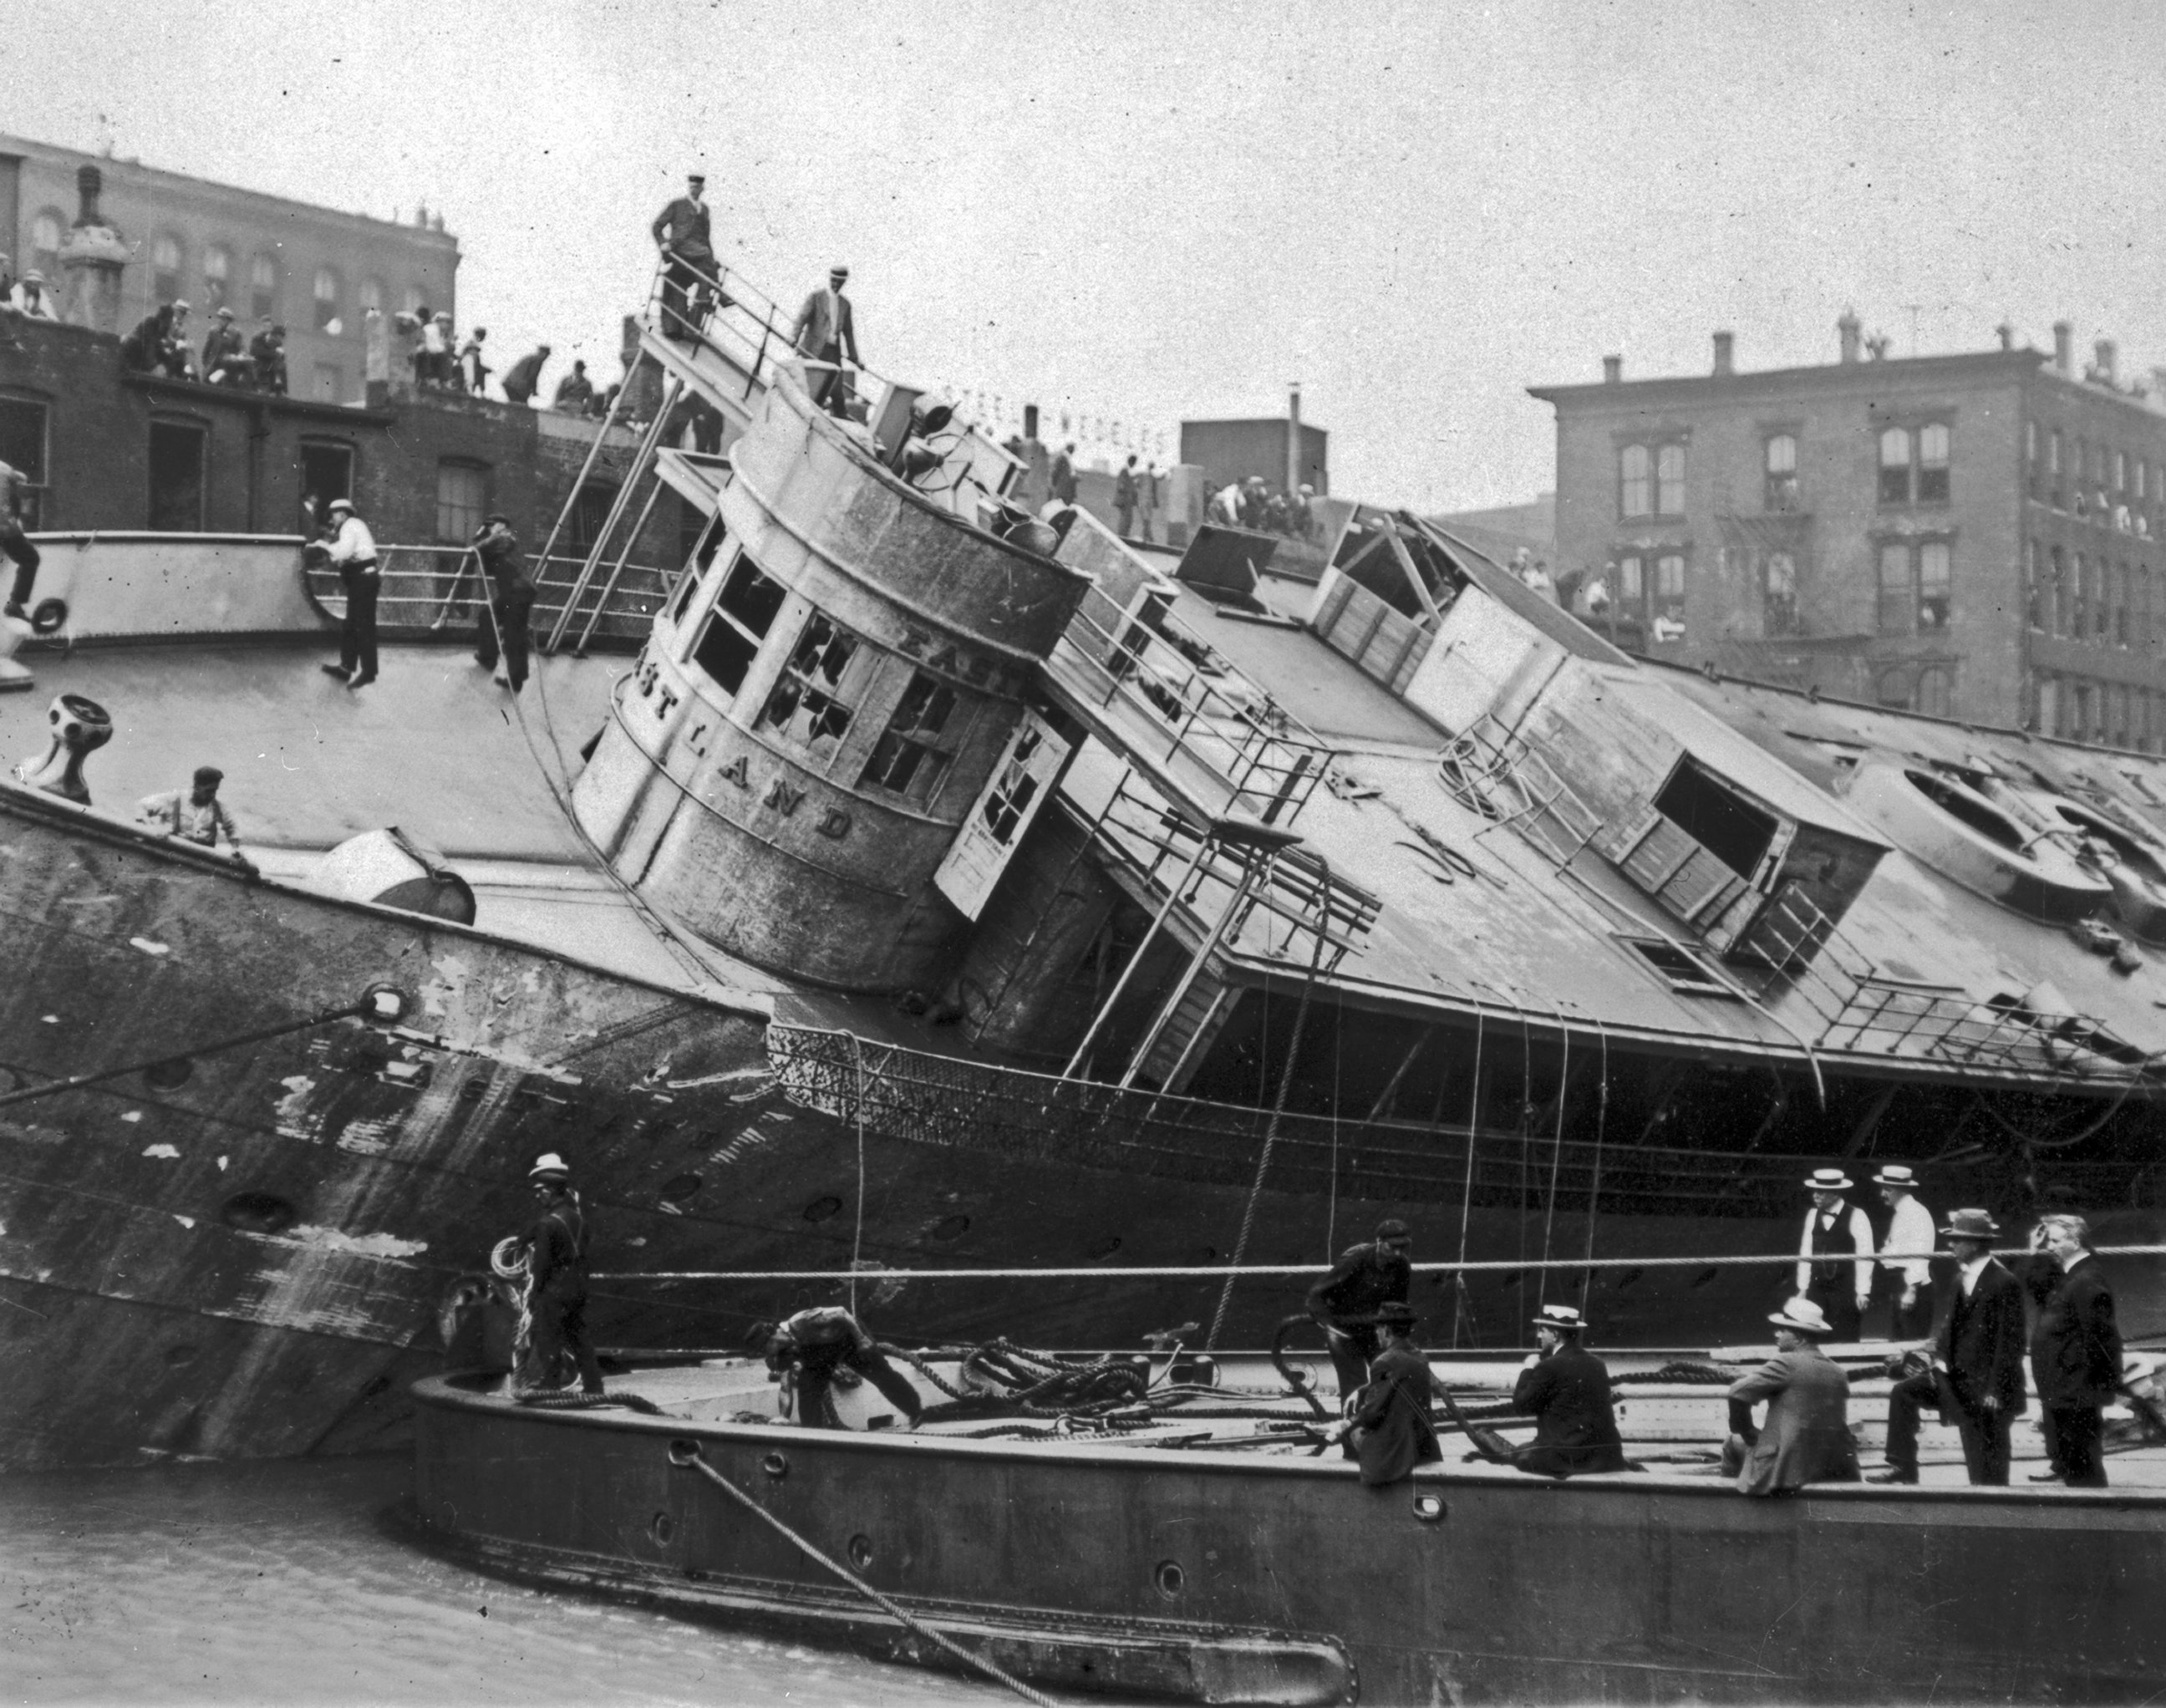 PHOTO: The Eastland ship being righted after the Eastland Disaster on the Chicago River, 1915.